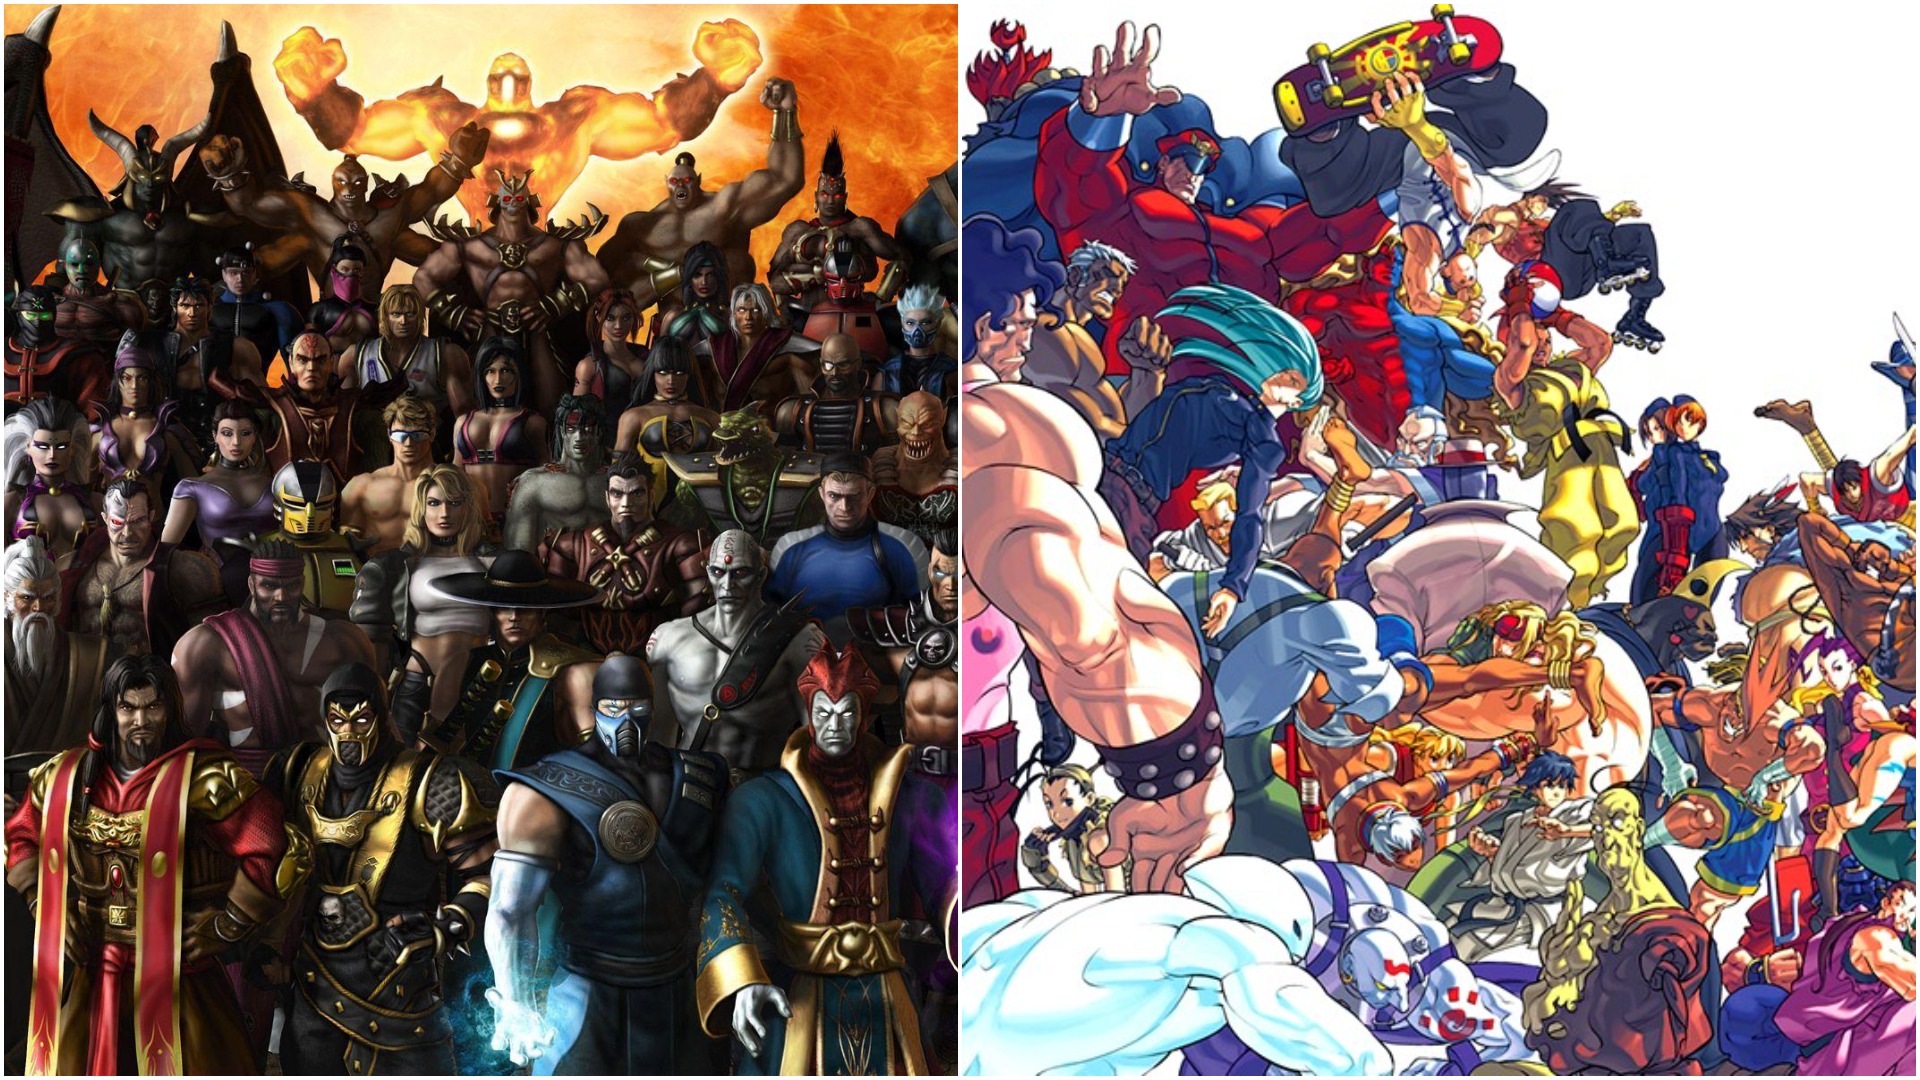 Read more about the article Mortal Kombat vs. Street Fighter: Which Has the Better Roster?